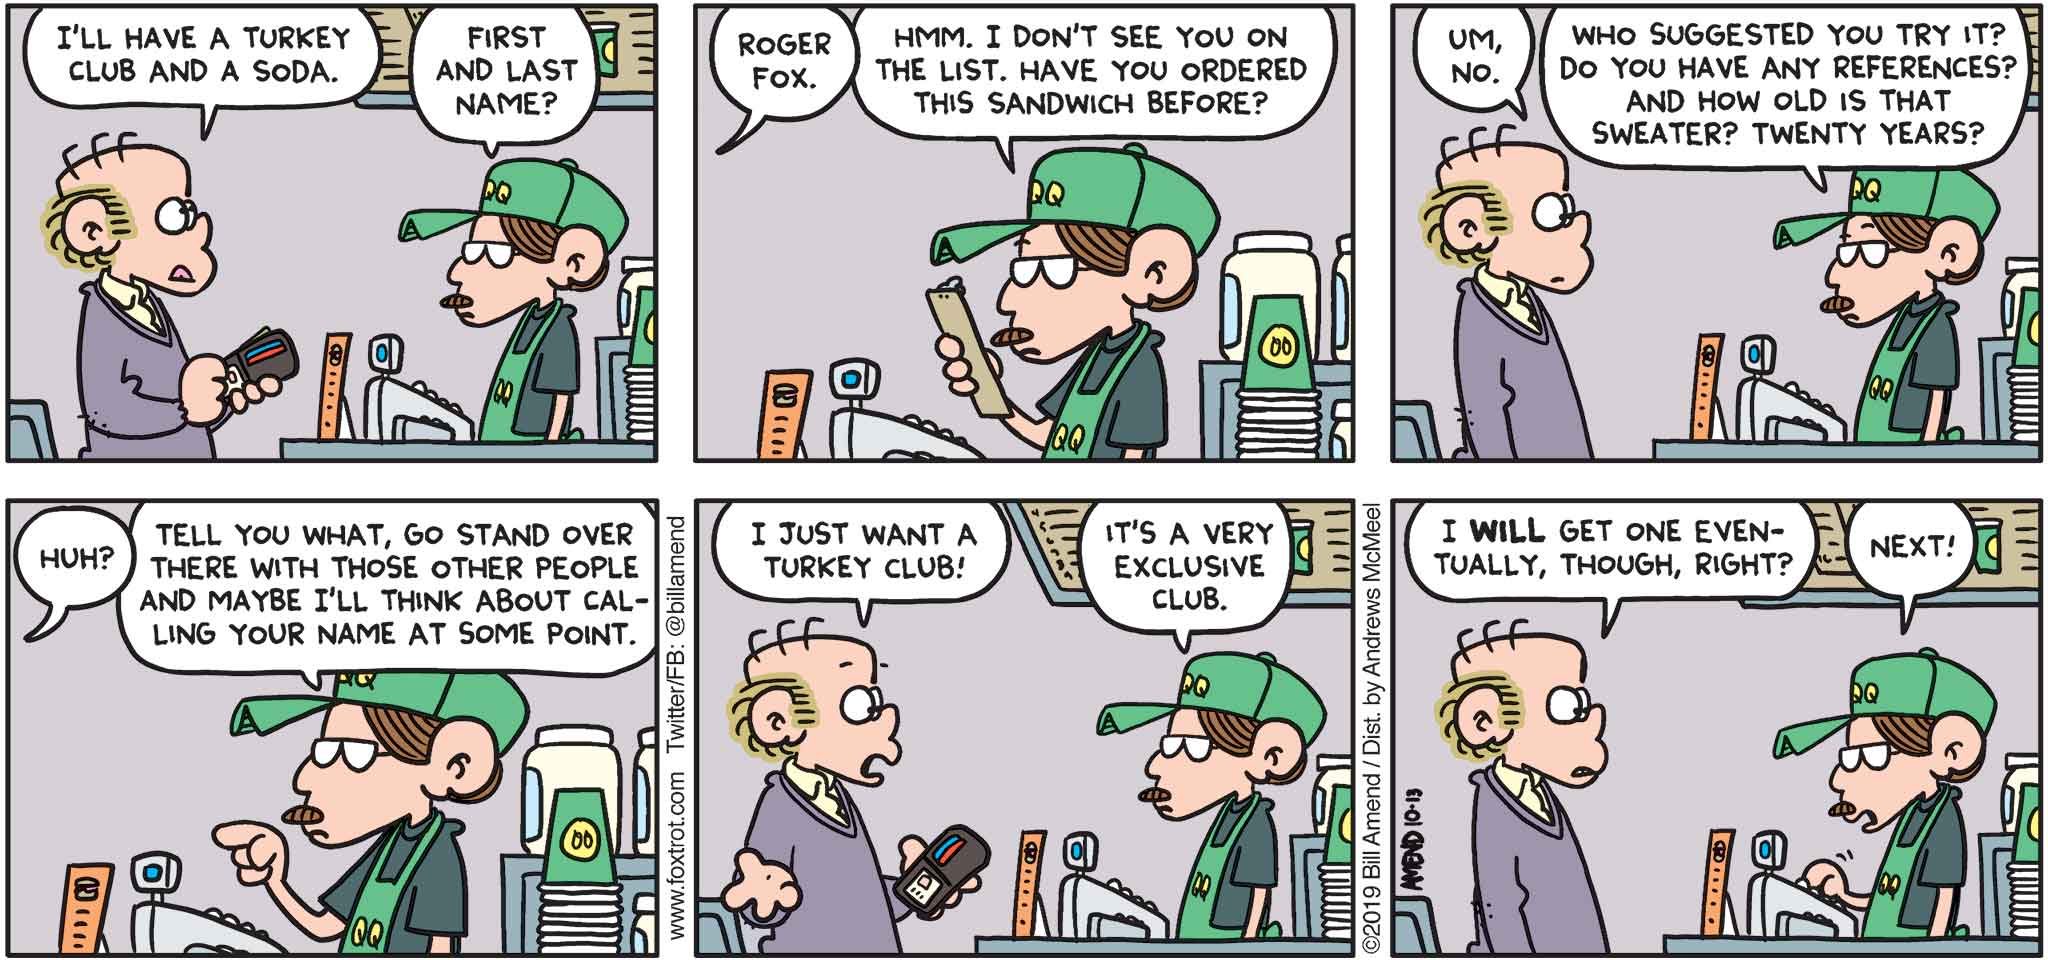 FoxTrot by Bill Amend - "The Turkey Club" published October 13, 2019 - Roger: I'll have a turkey club and a soda. Cashier: First and last name? Roger: Roger Fox. Cashier: Hmm. I don't see you on the list. Have you ordered this sandwich before? Roger: Um, no. Cashier: Who suggested you try it? Do you have any references? And how old is that sweater? Twenty years? Roger: Huh? Cashier: Tell you what, go stand over there with those other people and maybe I'll think about calling your name at some point. Roger: I just want a turkey club! Cashier: It's a very exclusive club. Roger: I will get one eventually, right? Cashier: Next!